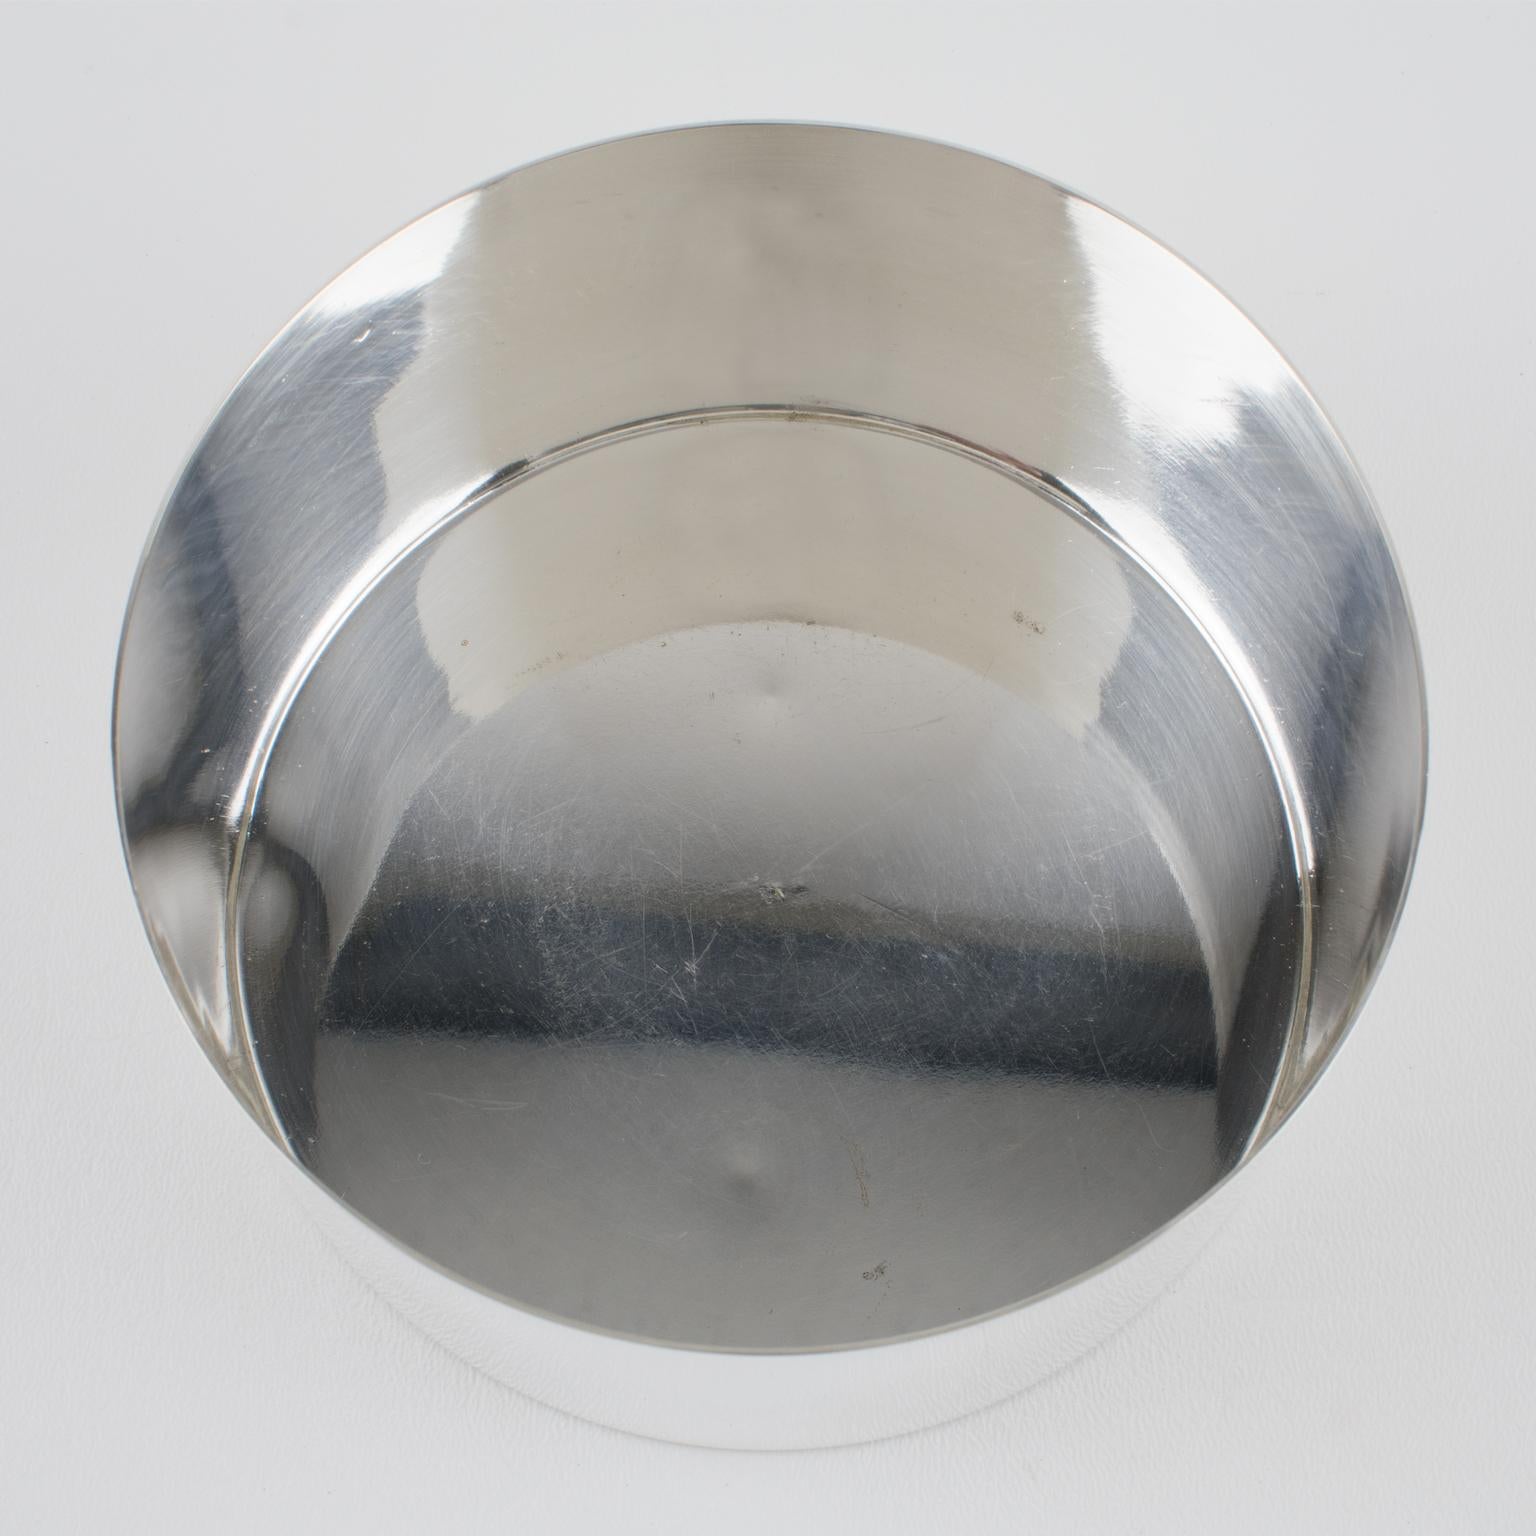 Mid-20th Century Silver Plate and Lucite Round Box by Debladis, Paris For Sale